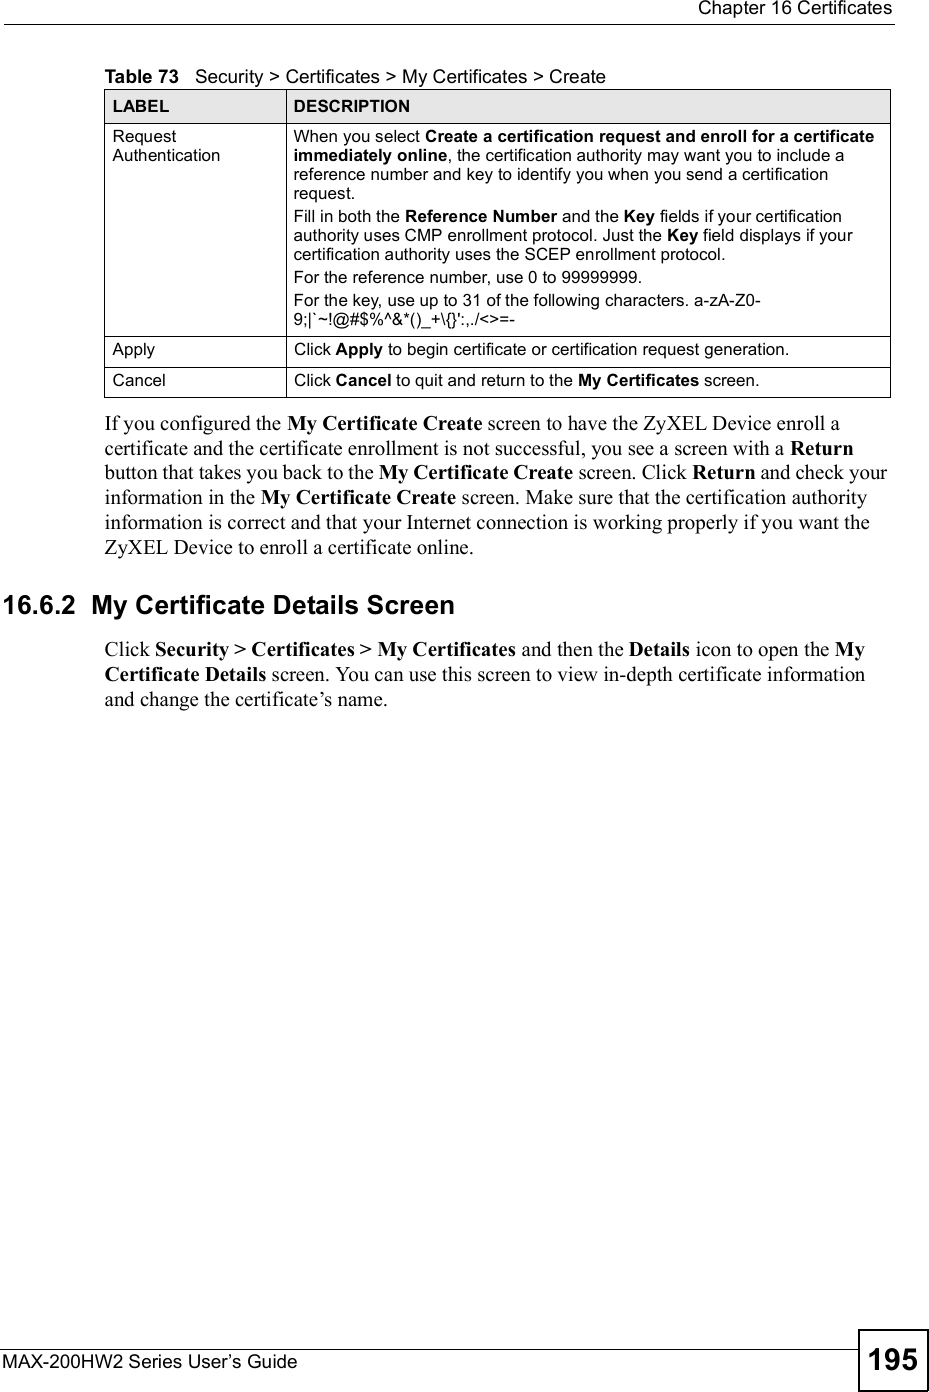  Chapter 16CertificatesMAX-200HW2 Series User s Guide 195If you configured the My Certificate Create screen to have the ZyXEL Device enroll a certificate and the certificate enrollment is not successful, you see a screen with a Returnbutton that takes you back to the My Certificate Create screen. Click Return and check your information in the My Certificate Create screen. Make sure that the certification authority information is correct and that your Internet connection is working properly if you want the ZyXEL Device to enroll a certificate online.16.6.2  My Certificate Details Screen Click Security &gt; Certificates &gt; My Certificates and then the Details iconto open the MyCertificate Details screen. You can use this screen to view in-depth certificate information and change the certificate!s name. Request AuthenticationWhen you select Create a certification request and enroll for a certificate immediately online, the certification authority may want you to include a reference number and key to identify you when you send a certification request. Fill in both the Reference Number and the Key fields if your certification authority uses CMP enrollment protocol. Just the Key field displays if your certification authority uses the SCEP enrollment protocol. For the reference number, use 0 to 99999999.For the key, use up to 31 of the following characters. a-zA-Z0-9;|`~!@#$%^&amp;*()_+\{}&apos;:,./&lt;&gt;=-ApplyClick Apply to begin certificate or certification request generation.CancelClick Cancel to quit and return to the My Certificates screen.Table 73   Security &gt; Certificates &gt; My Certificates &gt; CreateLABEL DESCRIPTION